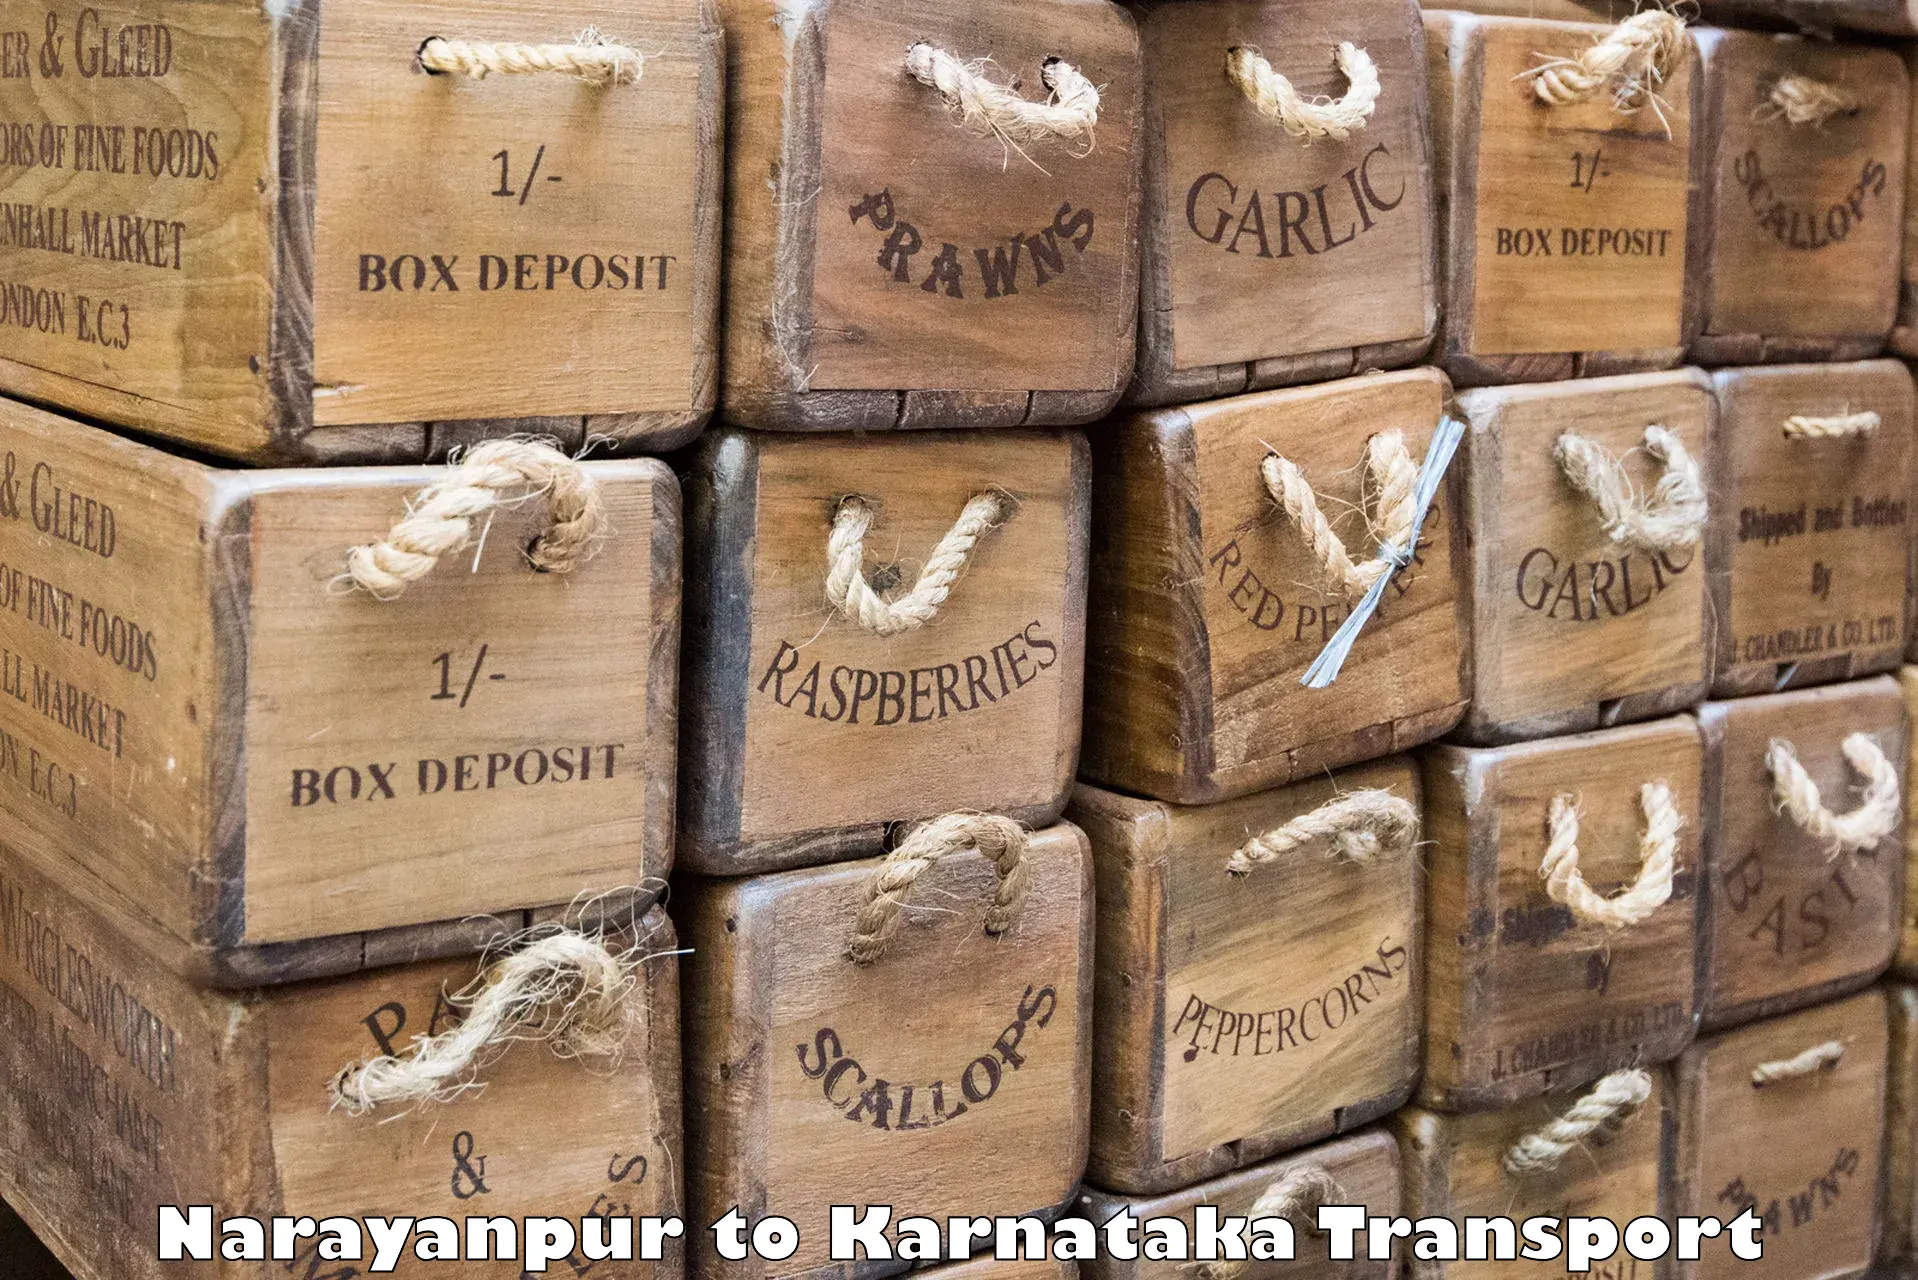 Nearby transport service Narayanpur to Bailhongal